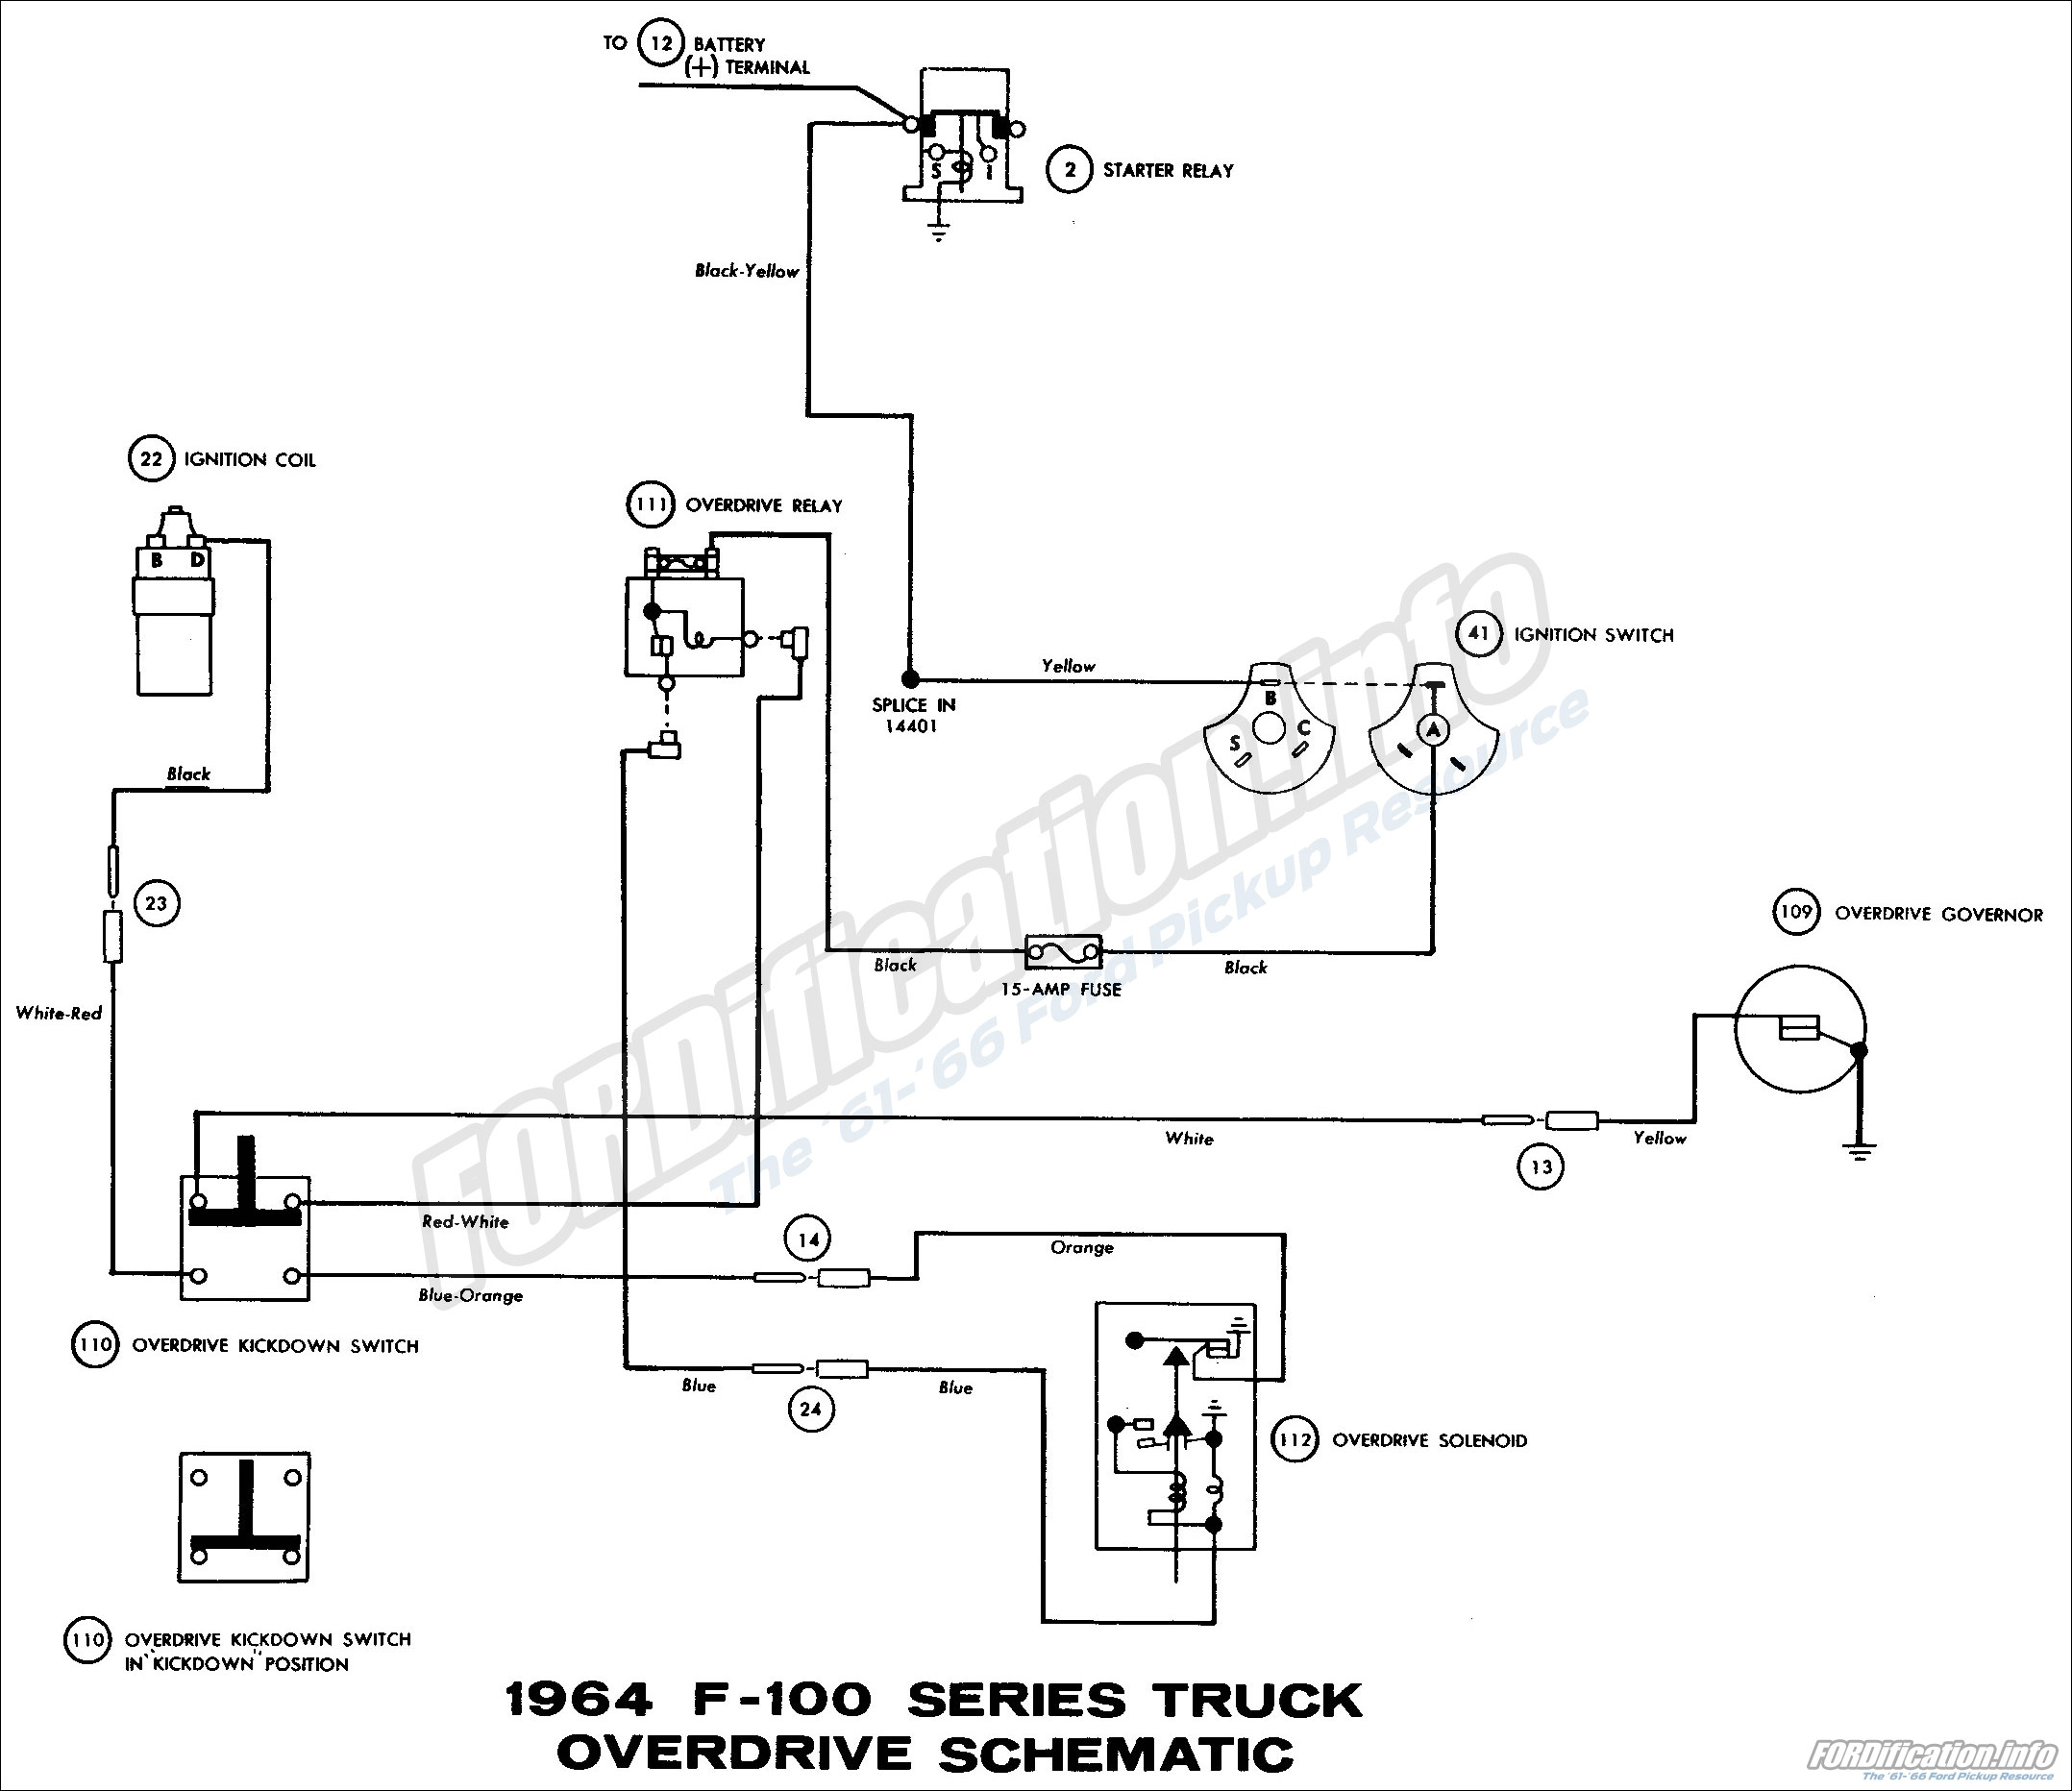 1964 Ford Truck Wiring Diagrams - FORDification.info - The ... basic horn wiring diagram 